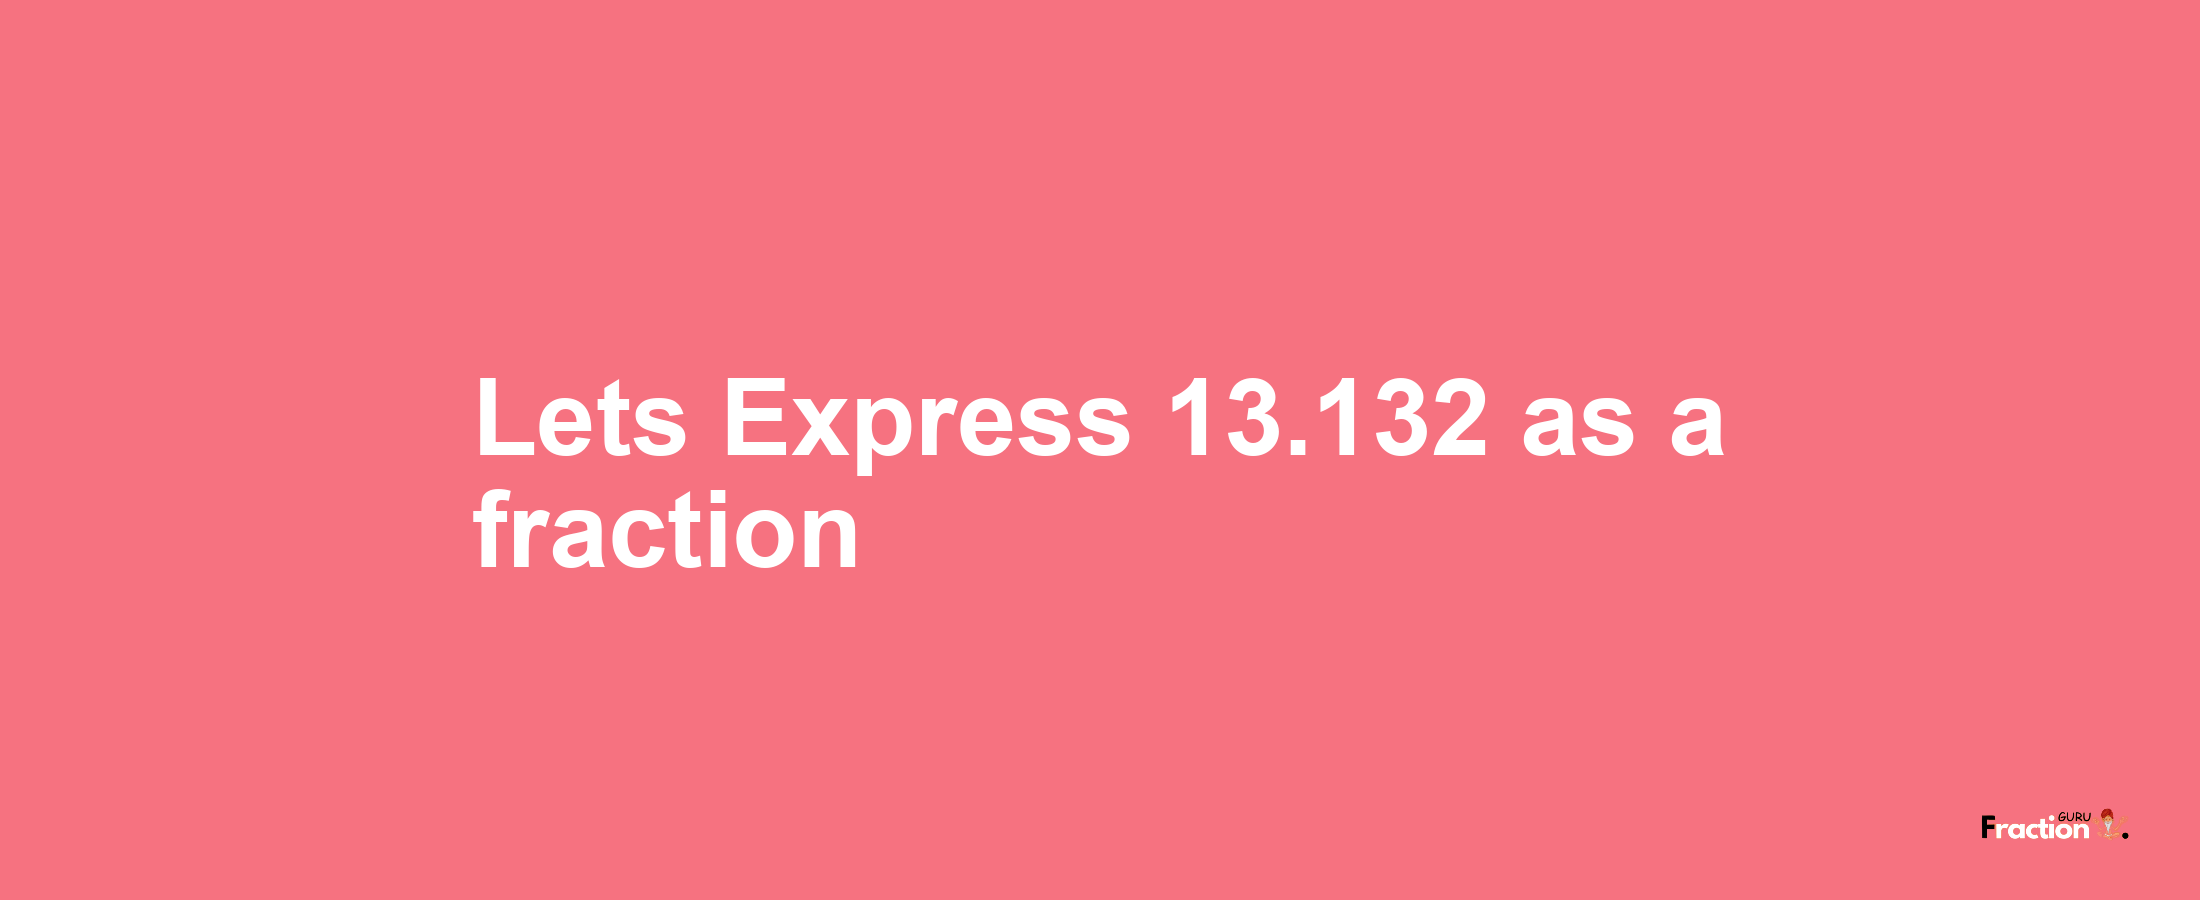 Lets Express 13.132 as afraction